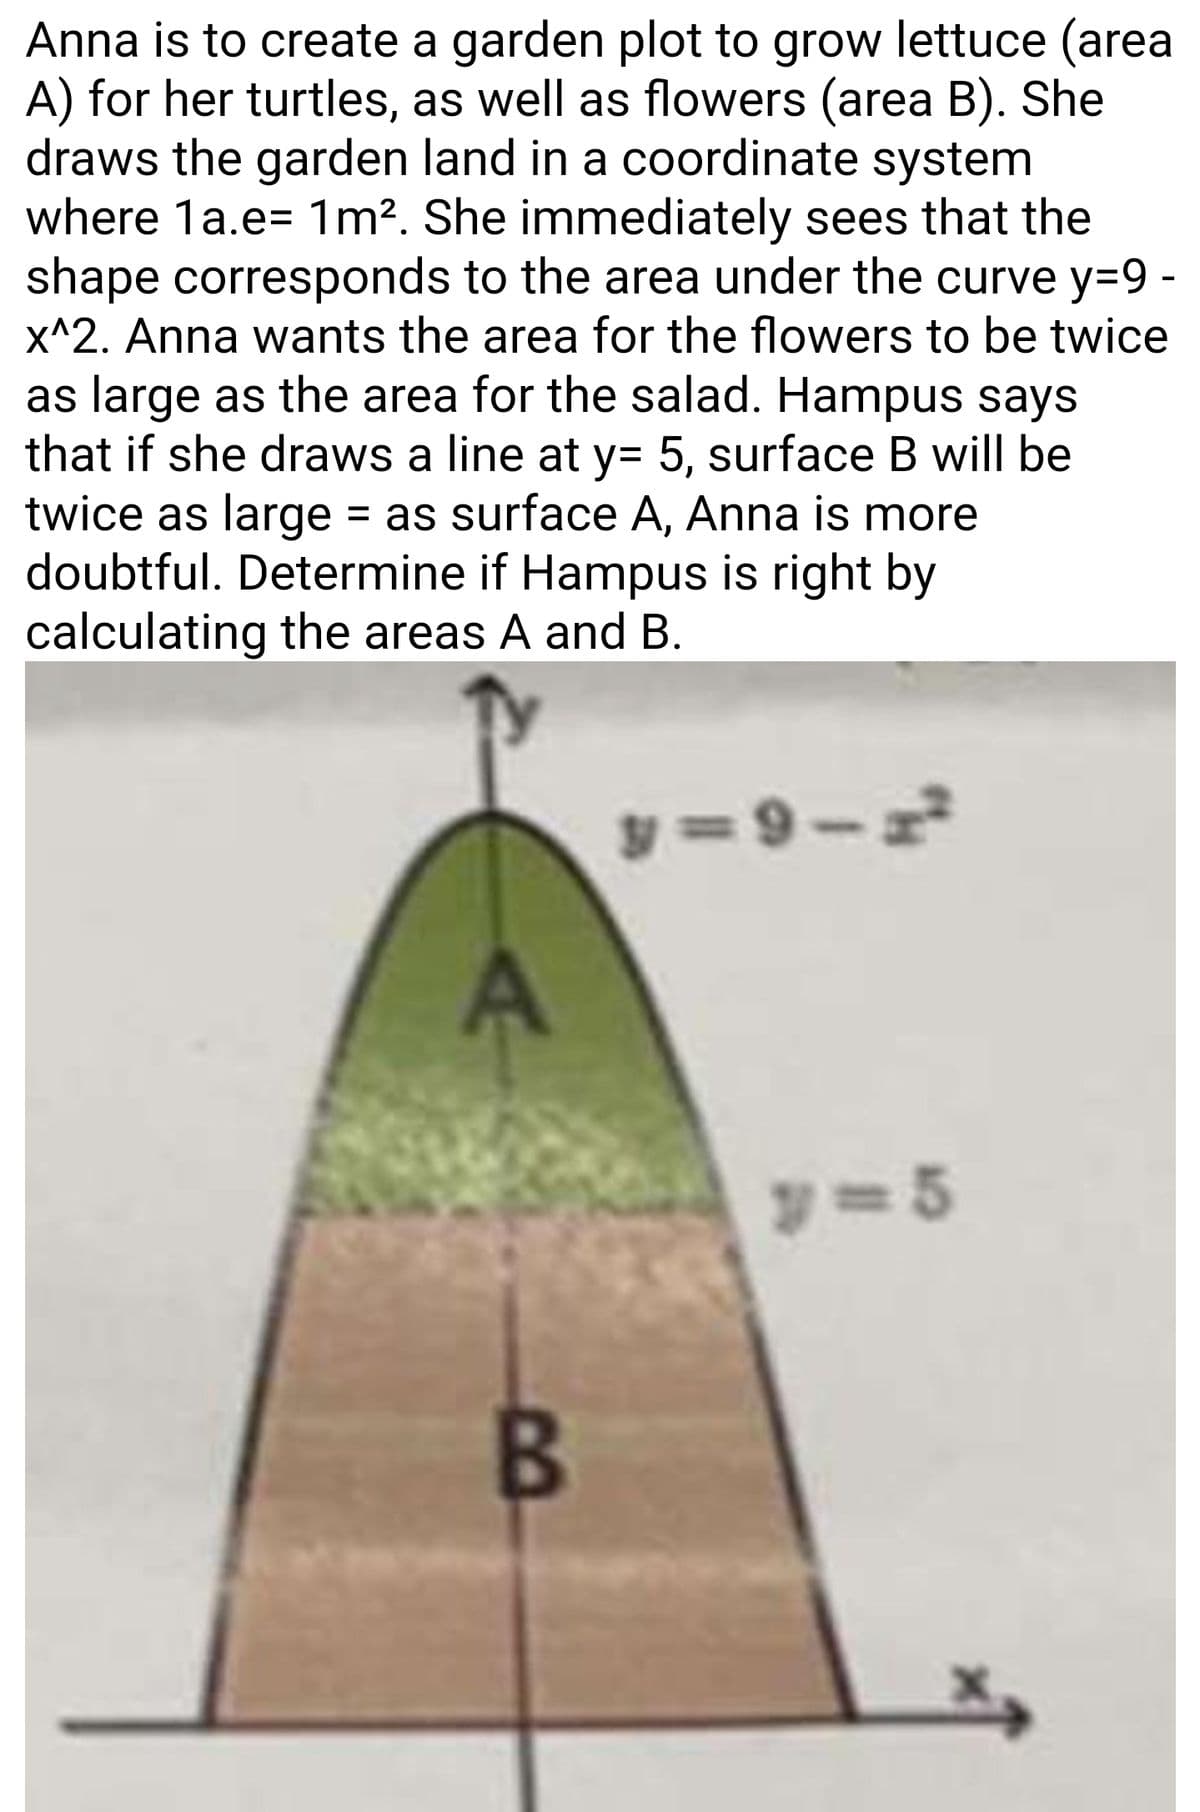 Anna is to create a garden plot to grow lettuce (area
A) for her turtles, as well as flowers (area B). She
draws the garden land in a coordinate system
where 1a.e= 1m². She immediately sees that the
shape corresponds to the area under the curve y=9 -
x^2. Anna wants the area for the flowers to be twice
as large as the area for the salad. Hampus says
that if she draws a line at y= 5, surface B will be
twice as large = as surface A, Anna is more
doubtful. Determine if Hampus is right by
calculating the areas A and B.
A
B